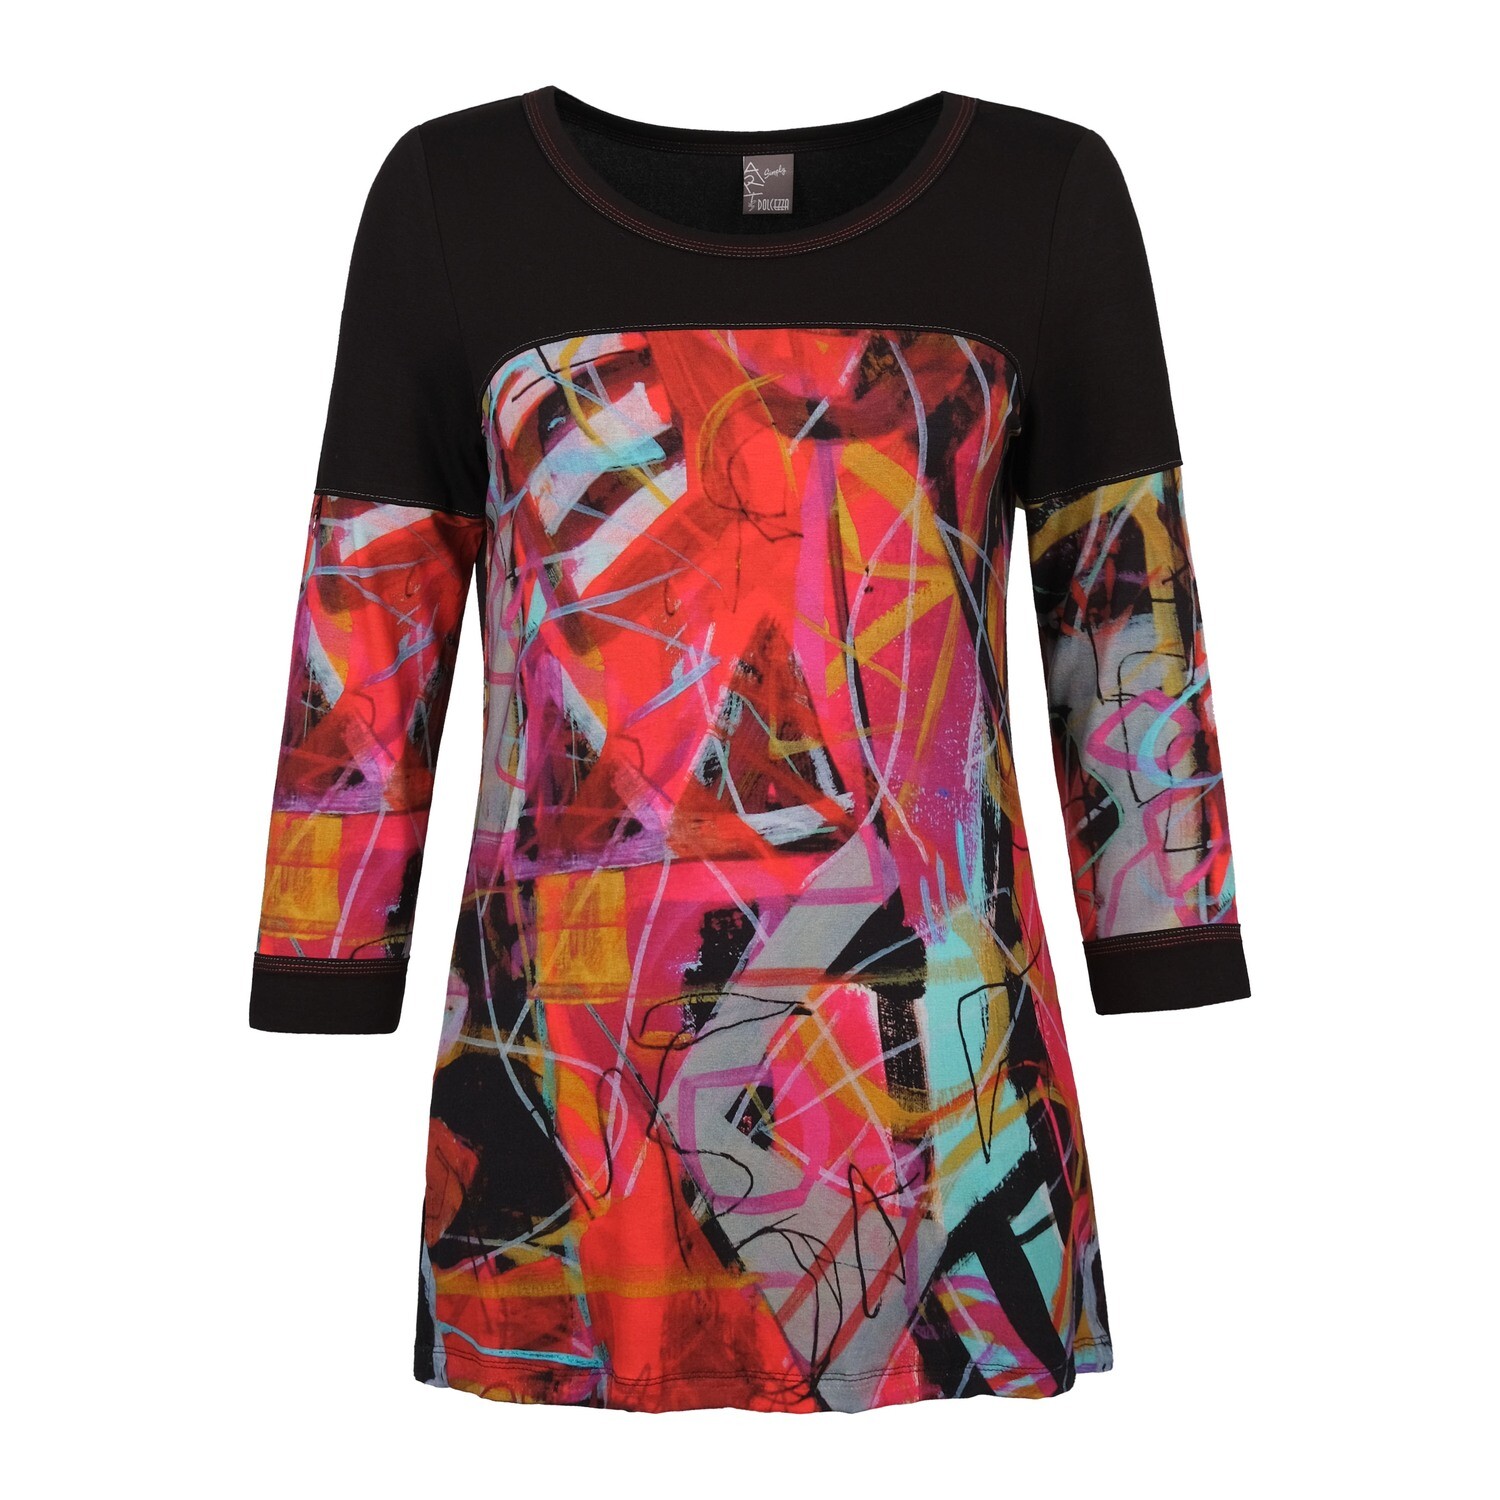 Simply Art Dolcezza: Red 3 Graffiti Abstract Art Colorblock T-Shirt SOLD OUT